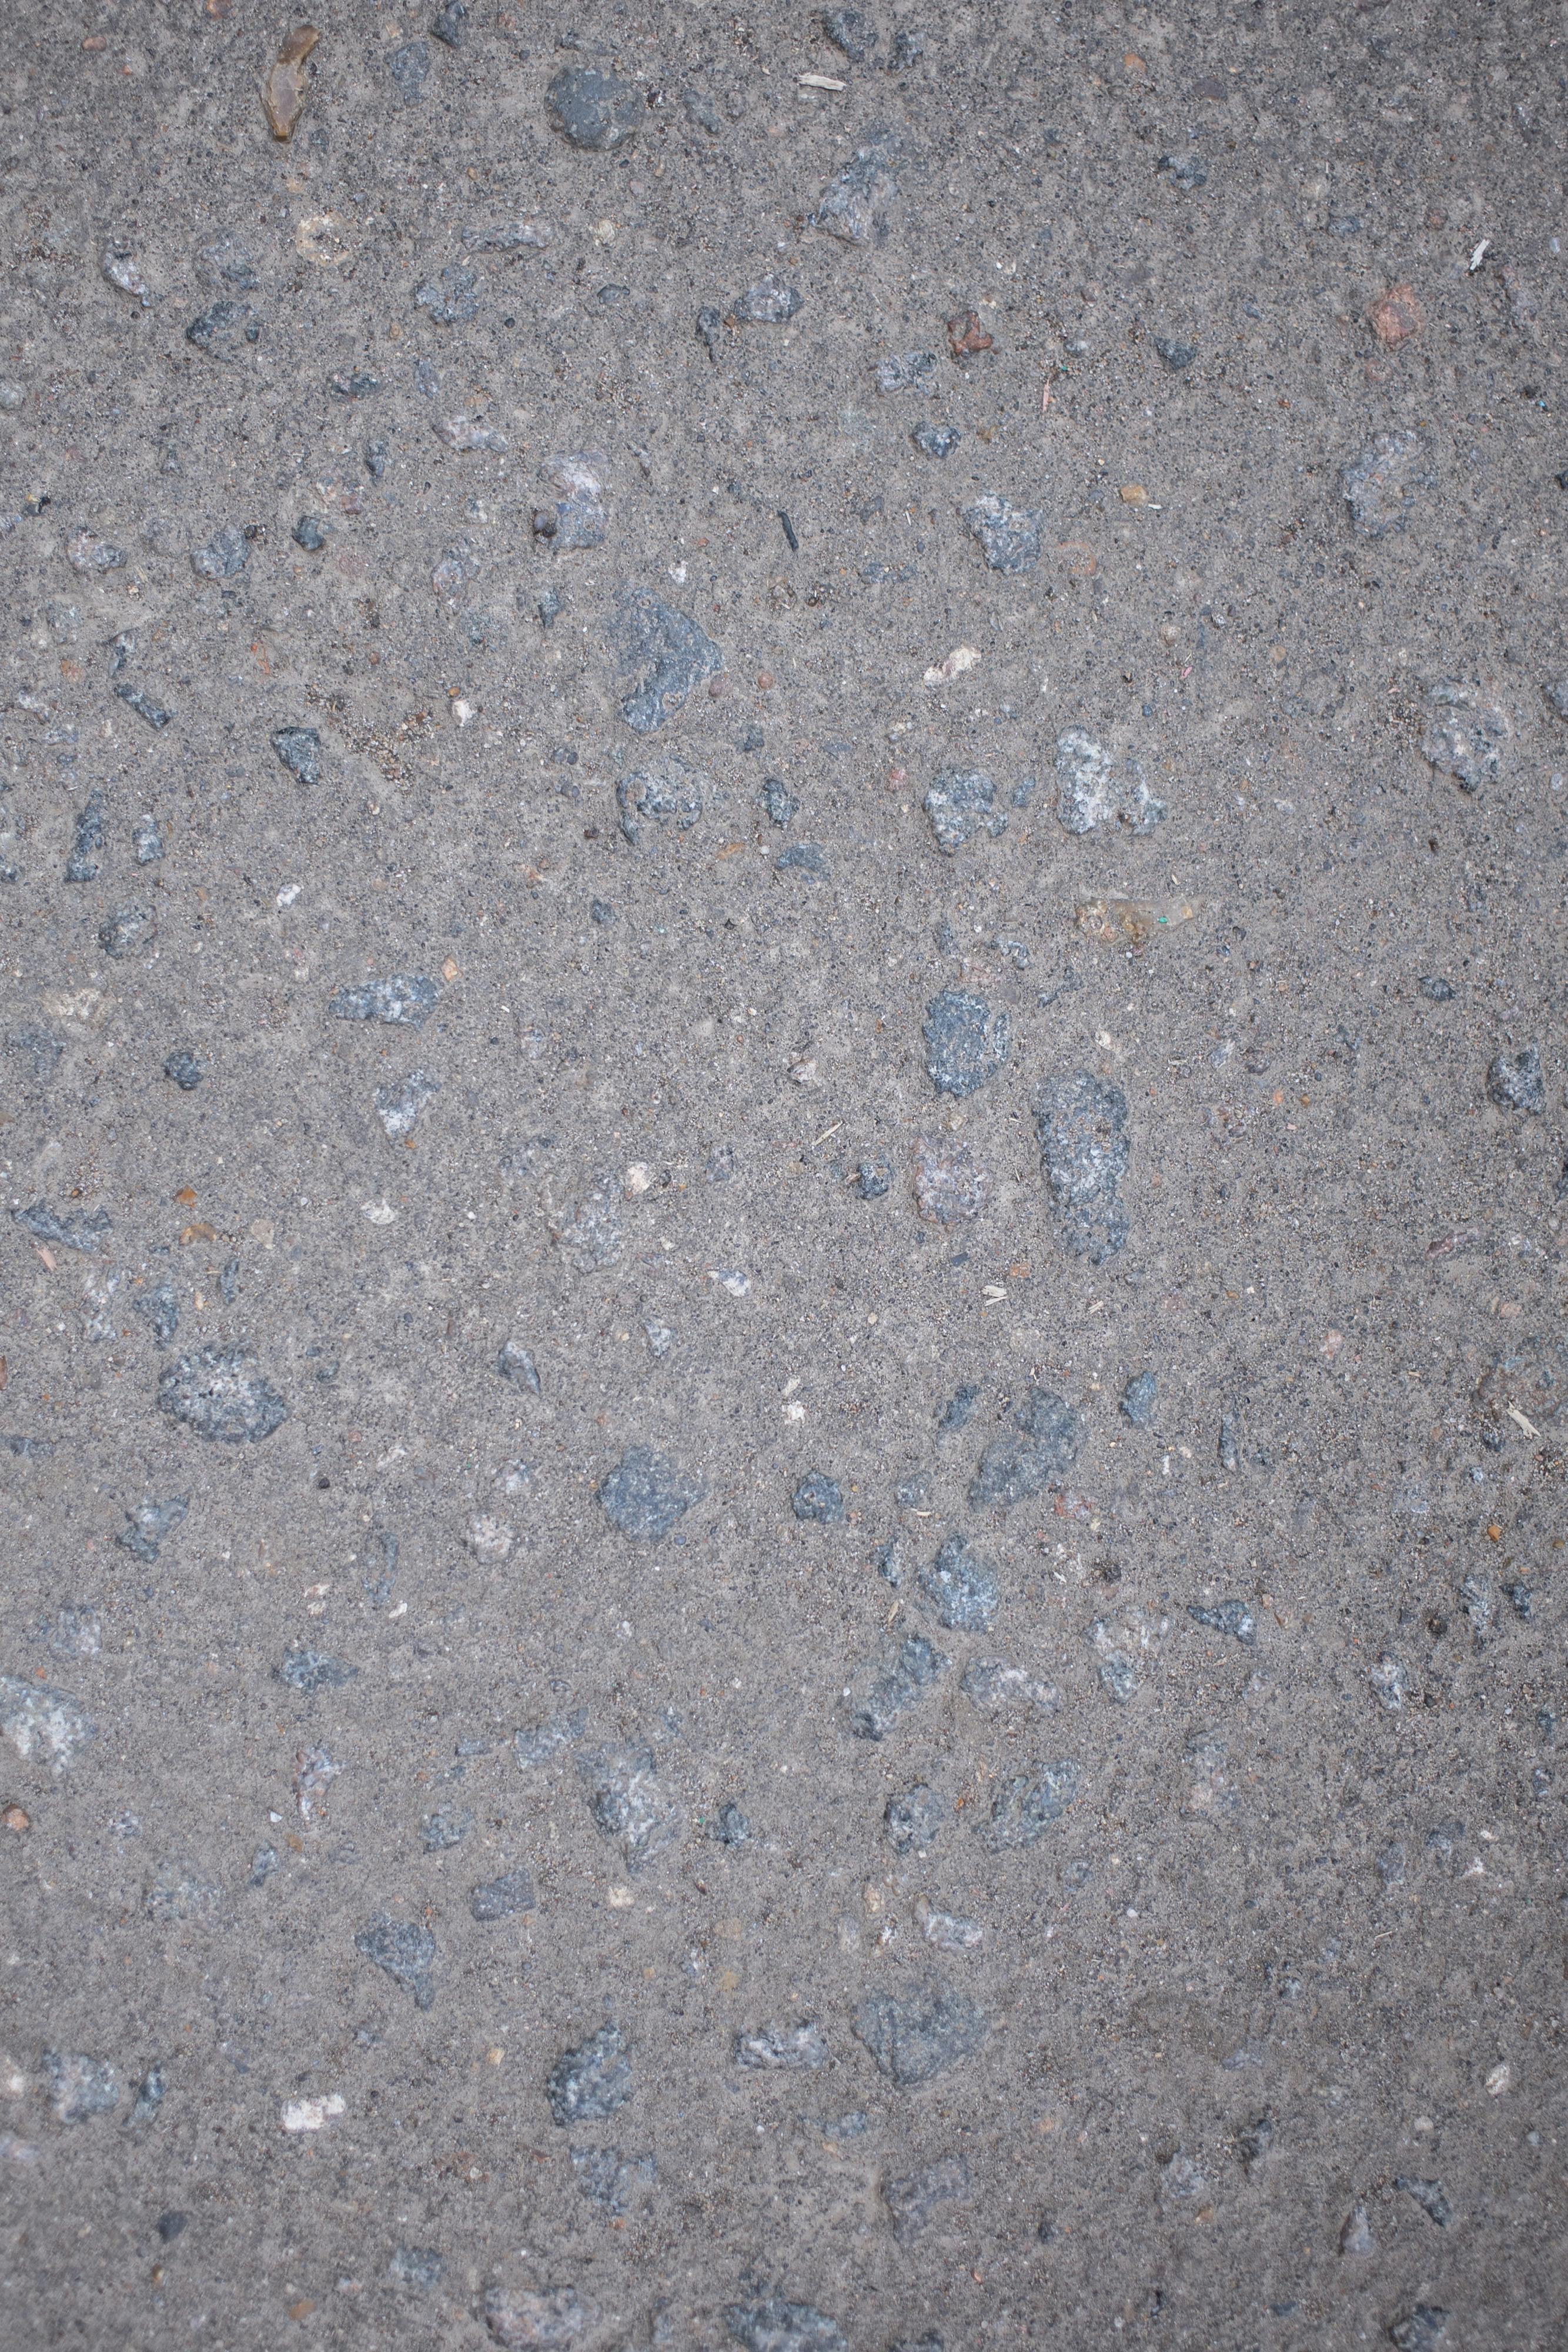 rough gray surface with stones